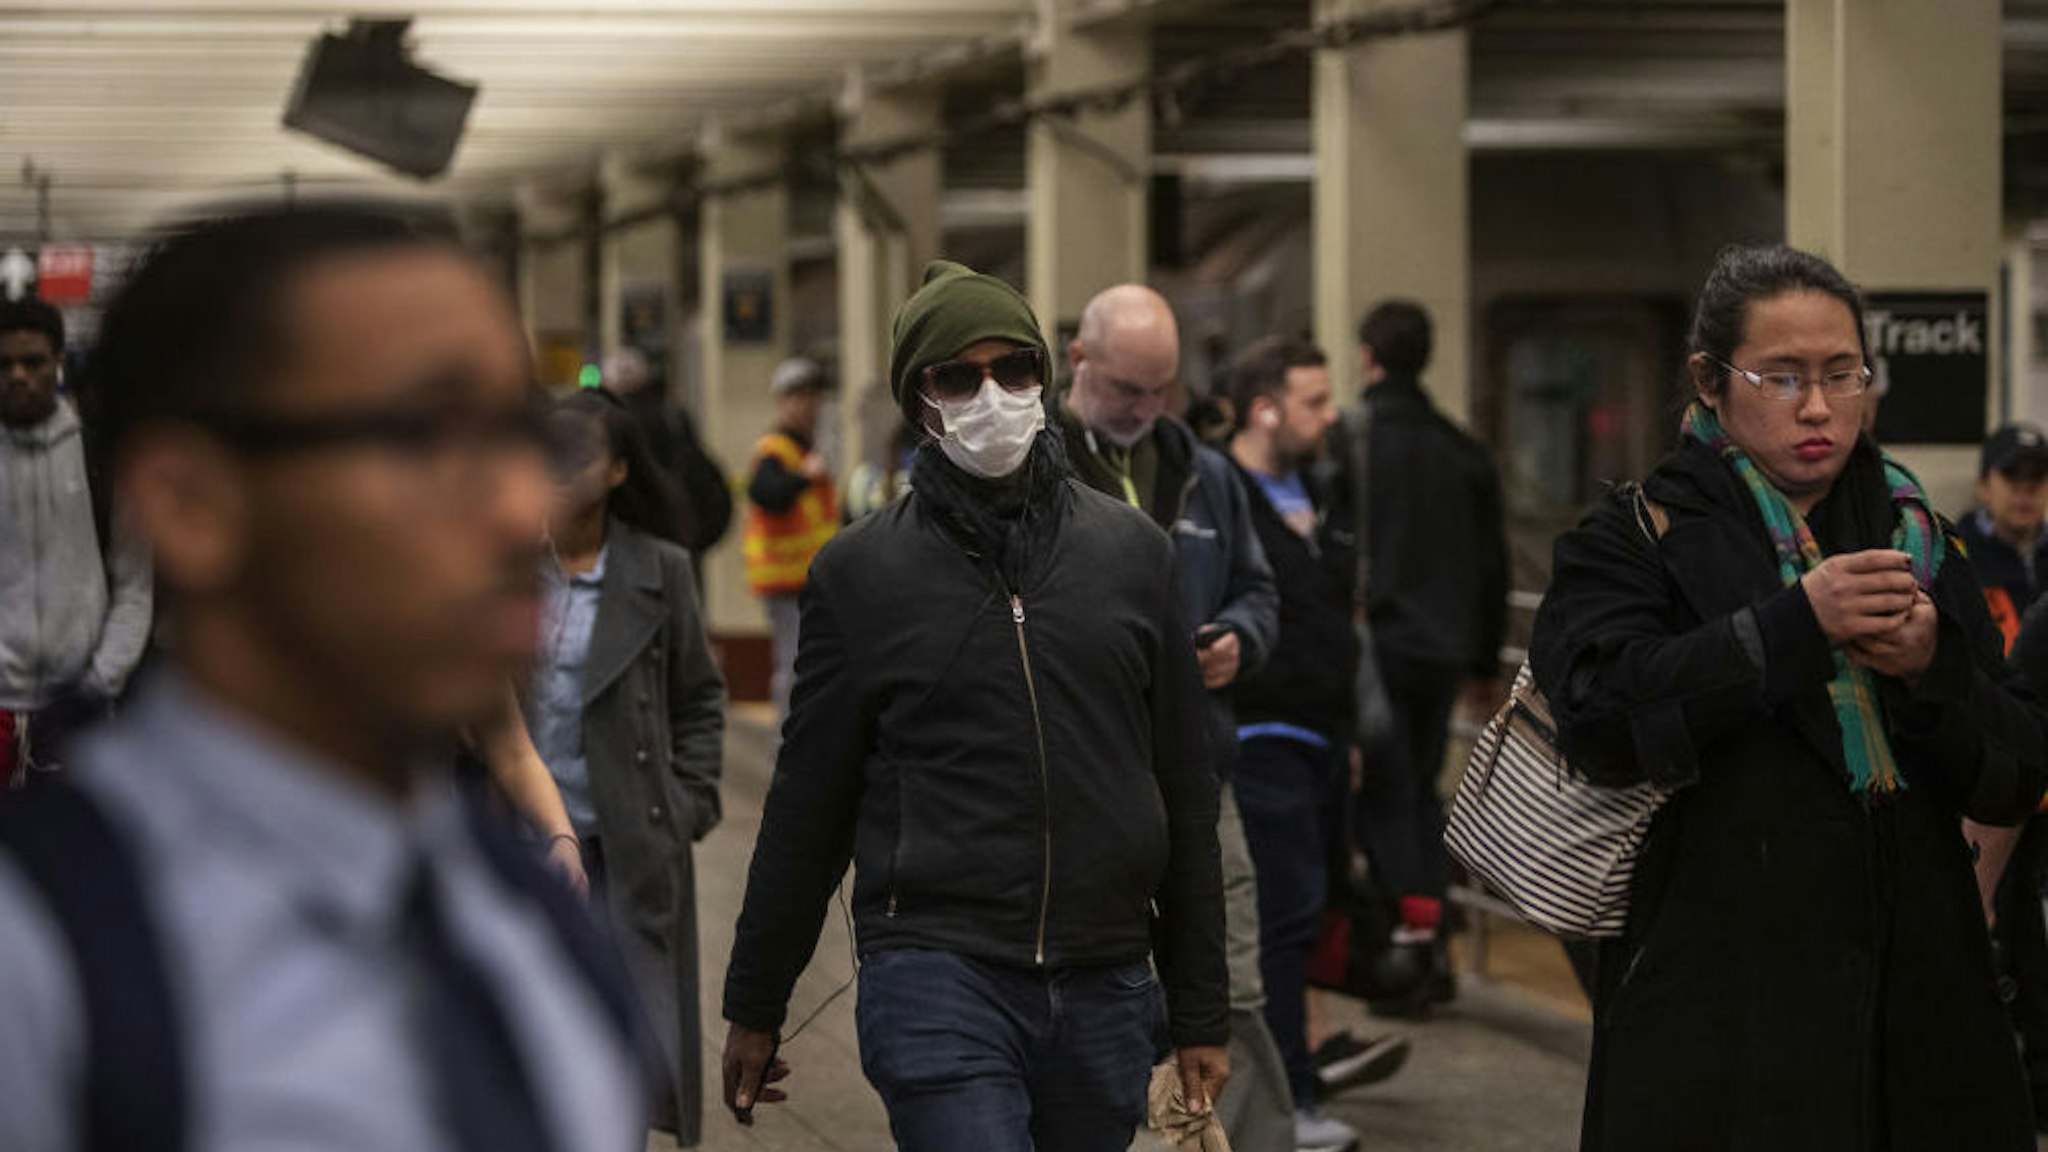 A commuter wears a mask while walking through a subway station in New York, U.S., on Monday, March 9, 2020. In a series of tweets Sunday, New Yorkers were encouraged by Mayor Bill de Blasio to avoid the busiest times of the subway and bus rush hour by telecommuting, staggering work schedules or walking or biking to work as cases of the coronavirus climb. Photographer: Victor J. Blue/Bloomberg